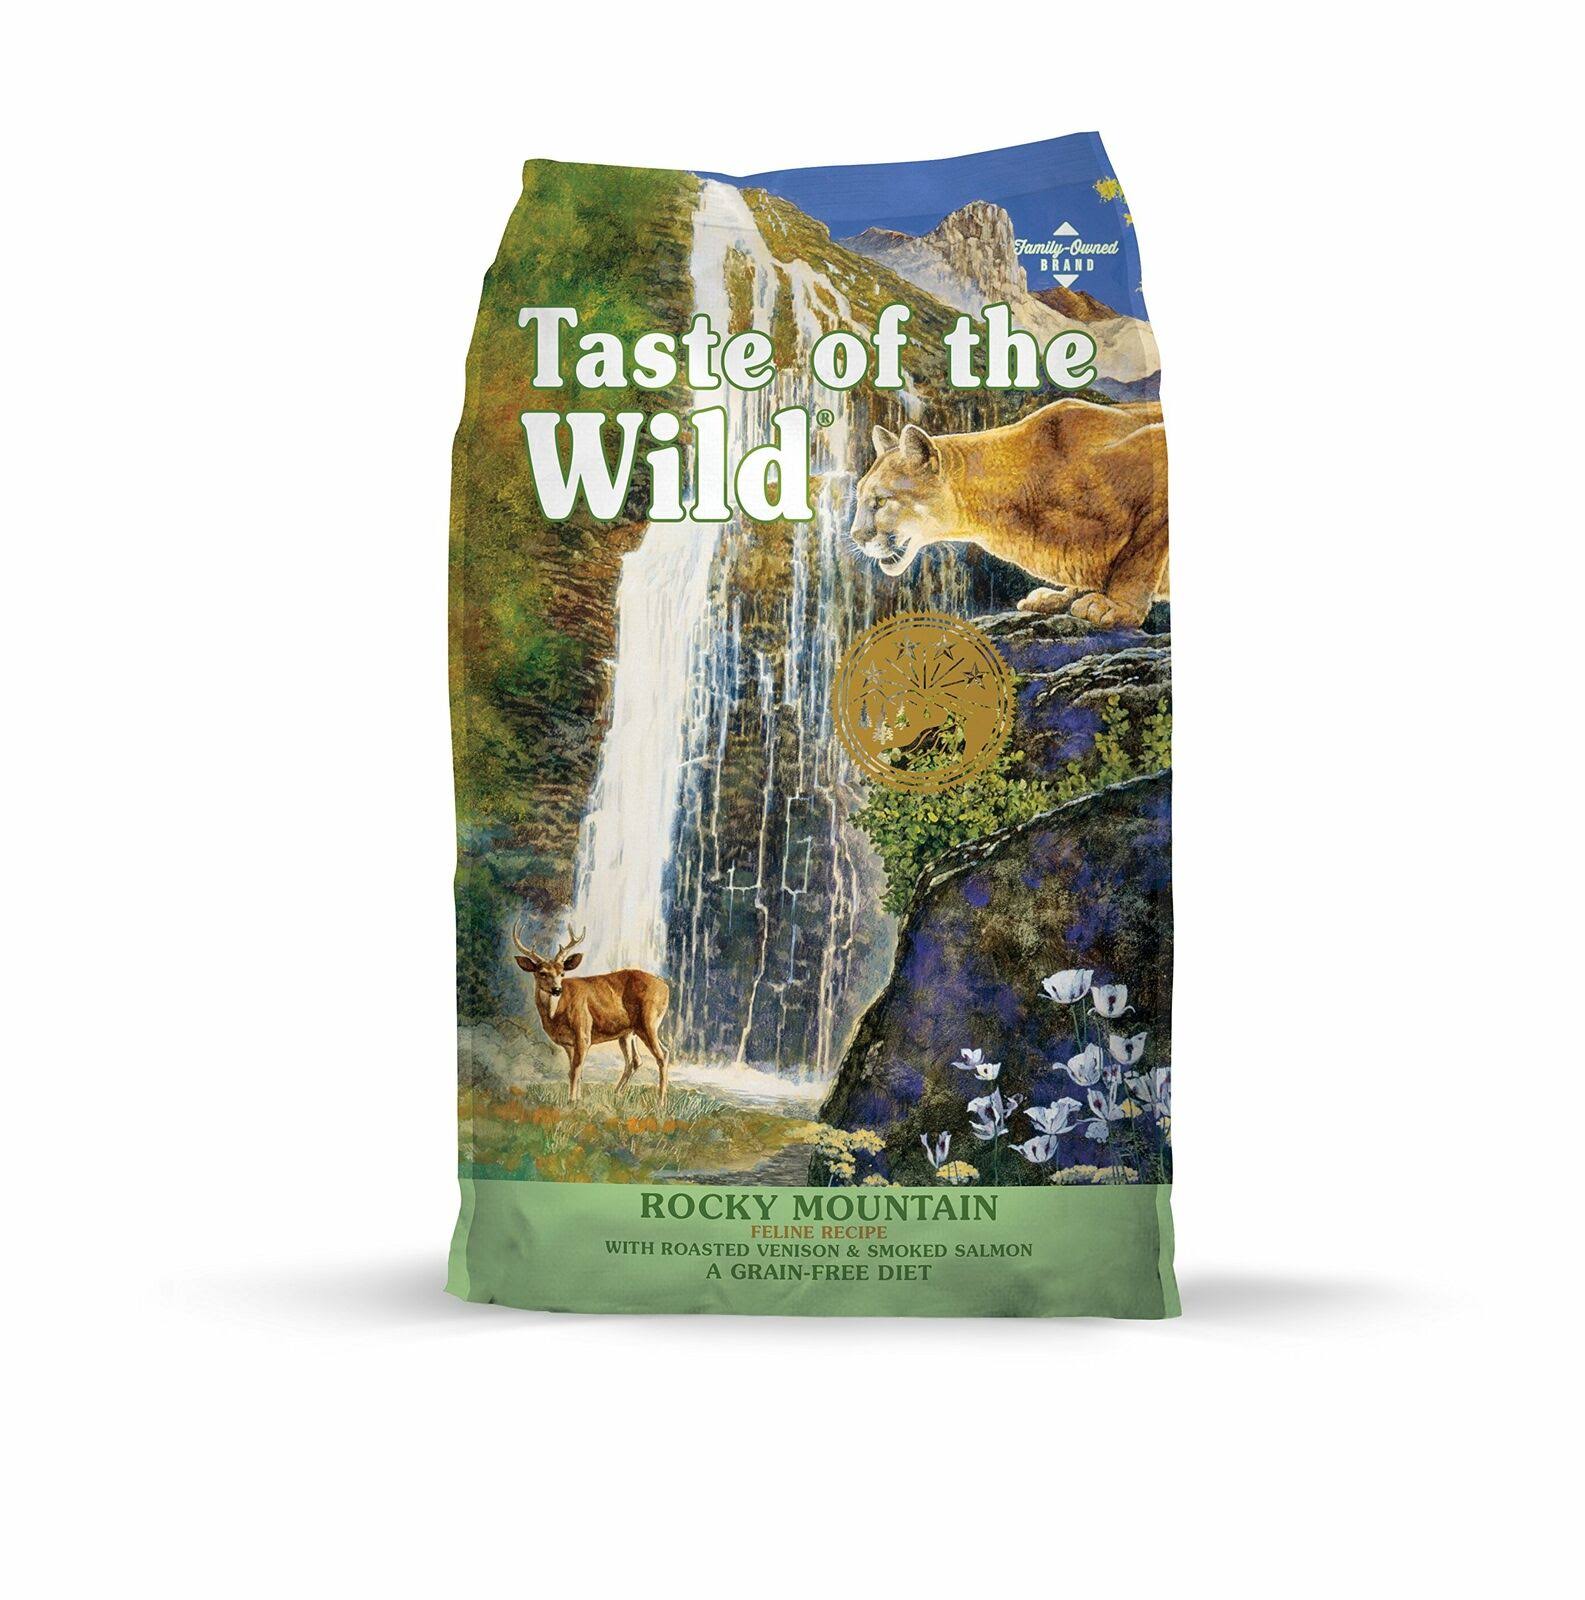 Taste of The Wild Rocky Mountain Grain-Free Dry Cat Food with Roasted Venison & Smoke-Flavored Salmon 14lb